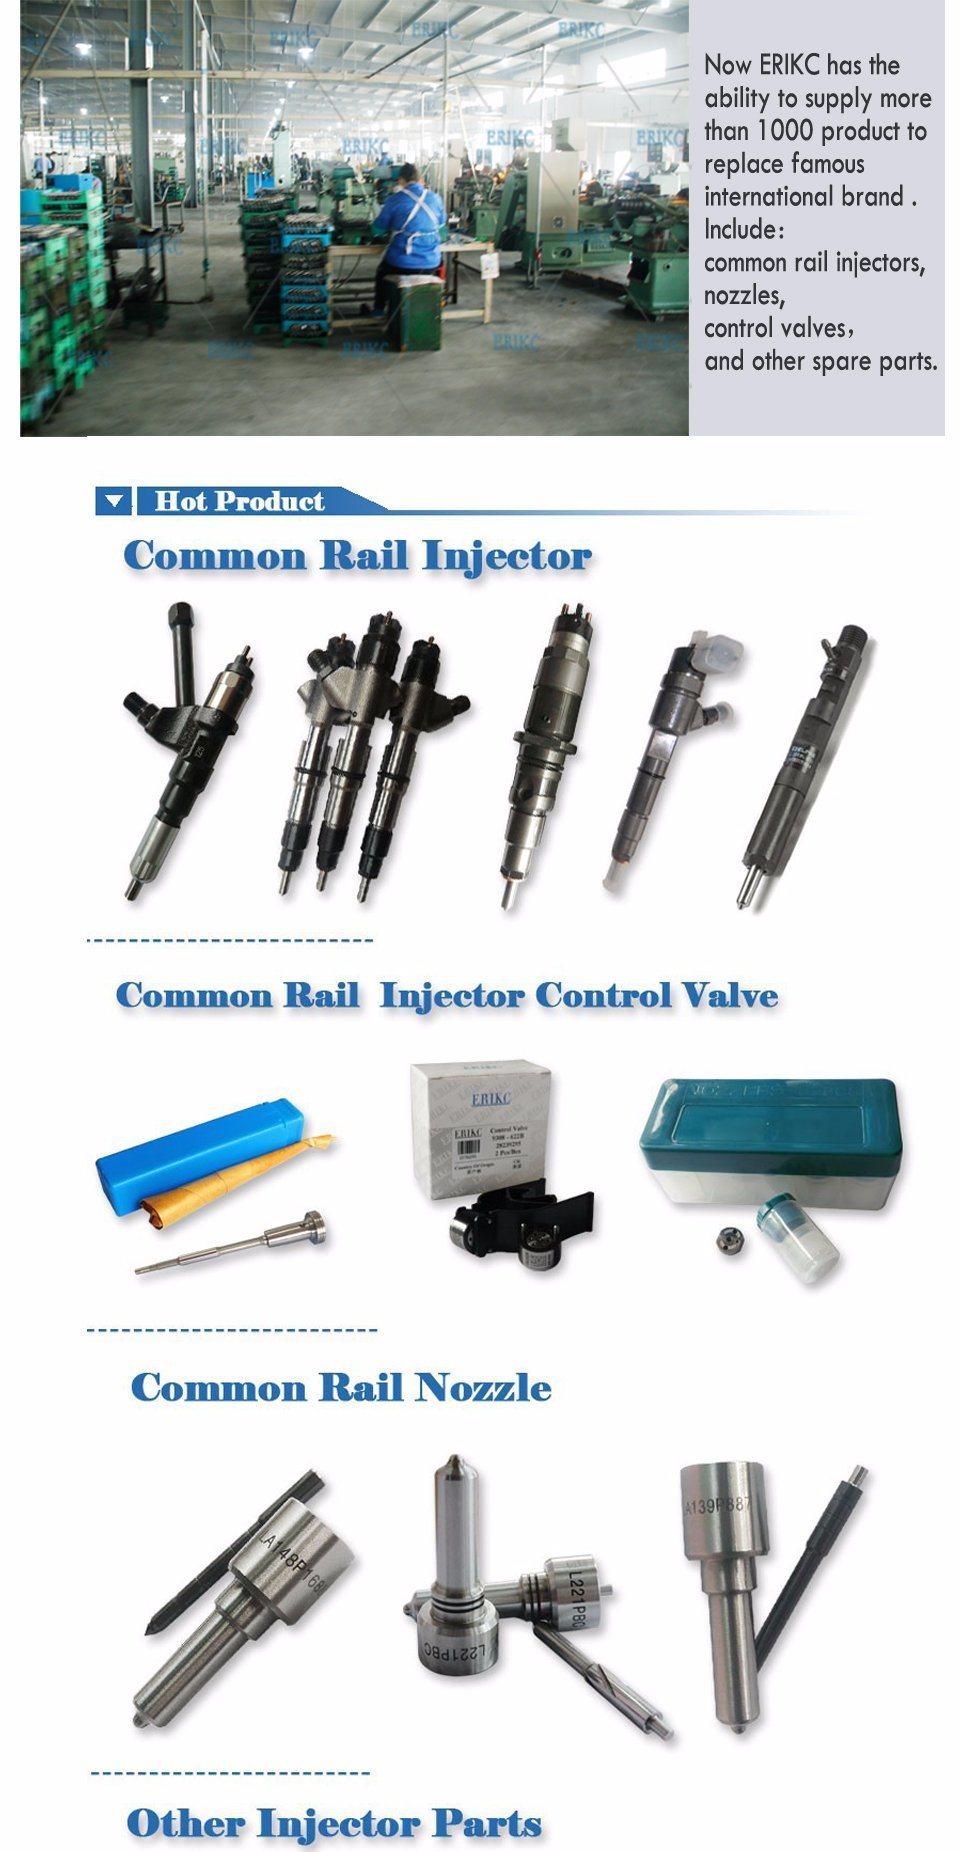 Diesel Fuel Injector Overhaul Kit 7135-644 Including Nozzle L087prd and Valve 9308-621c for Ejbr01701z / Ejbr04101d